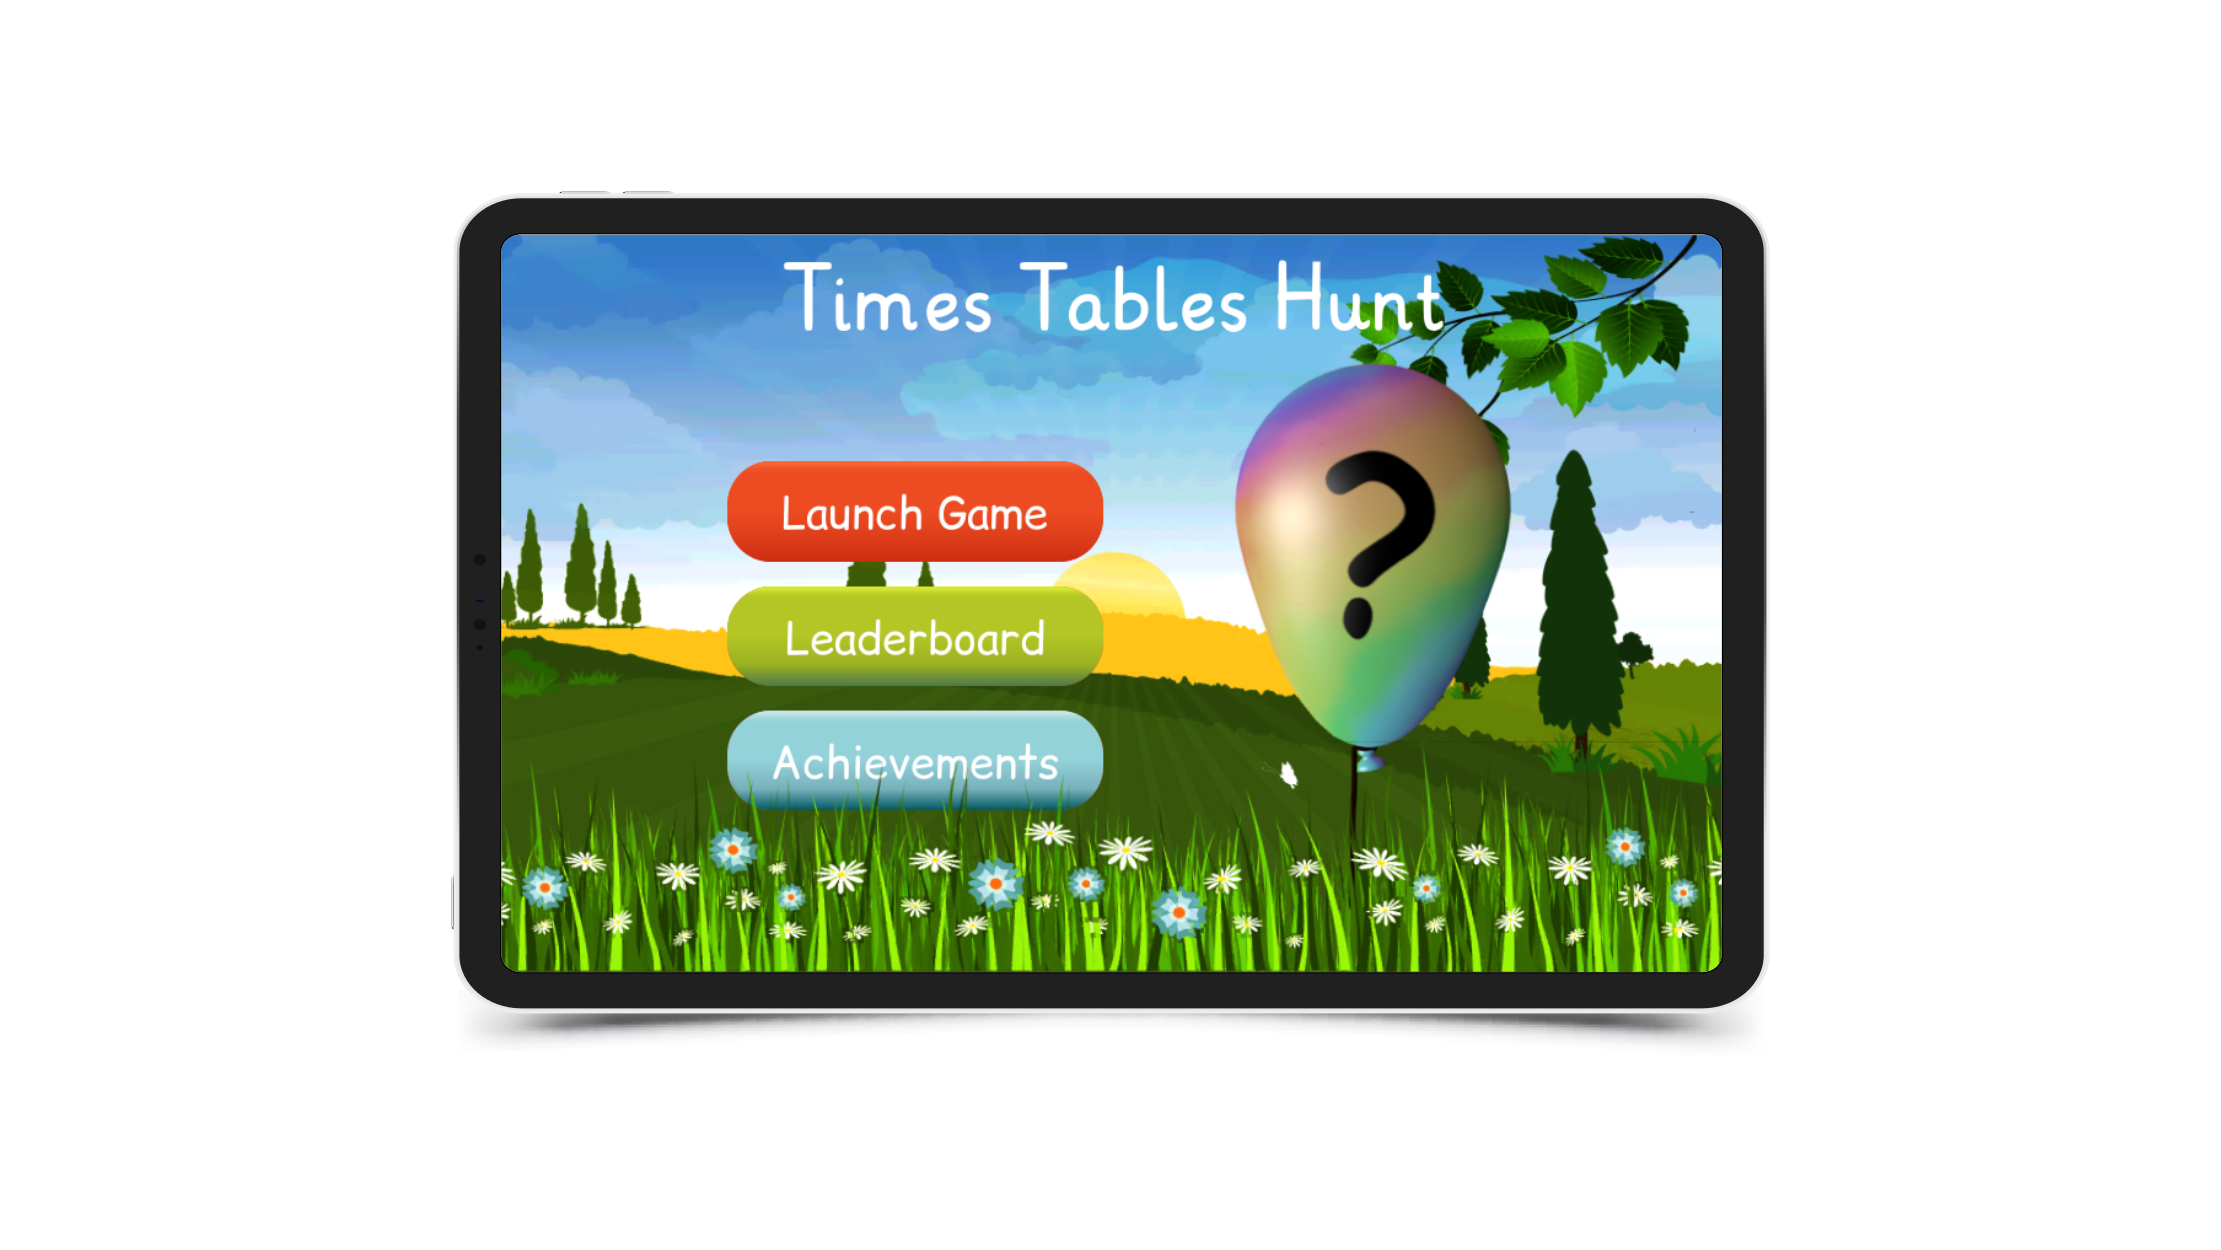 Main menu of Times Tables Hunt on a tablet, the best device for this educational game